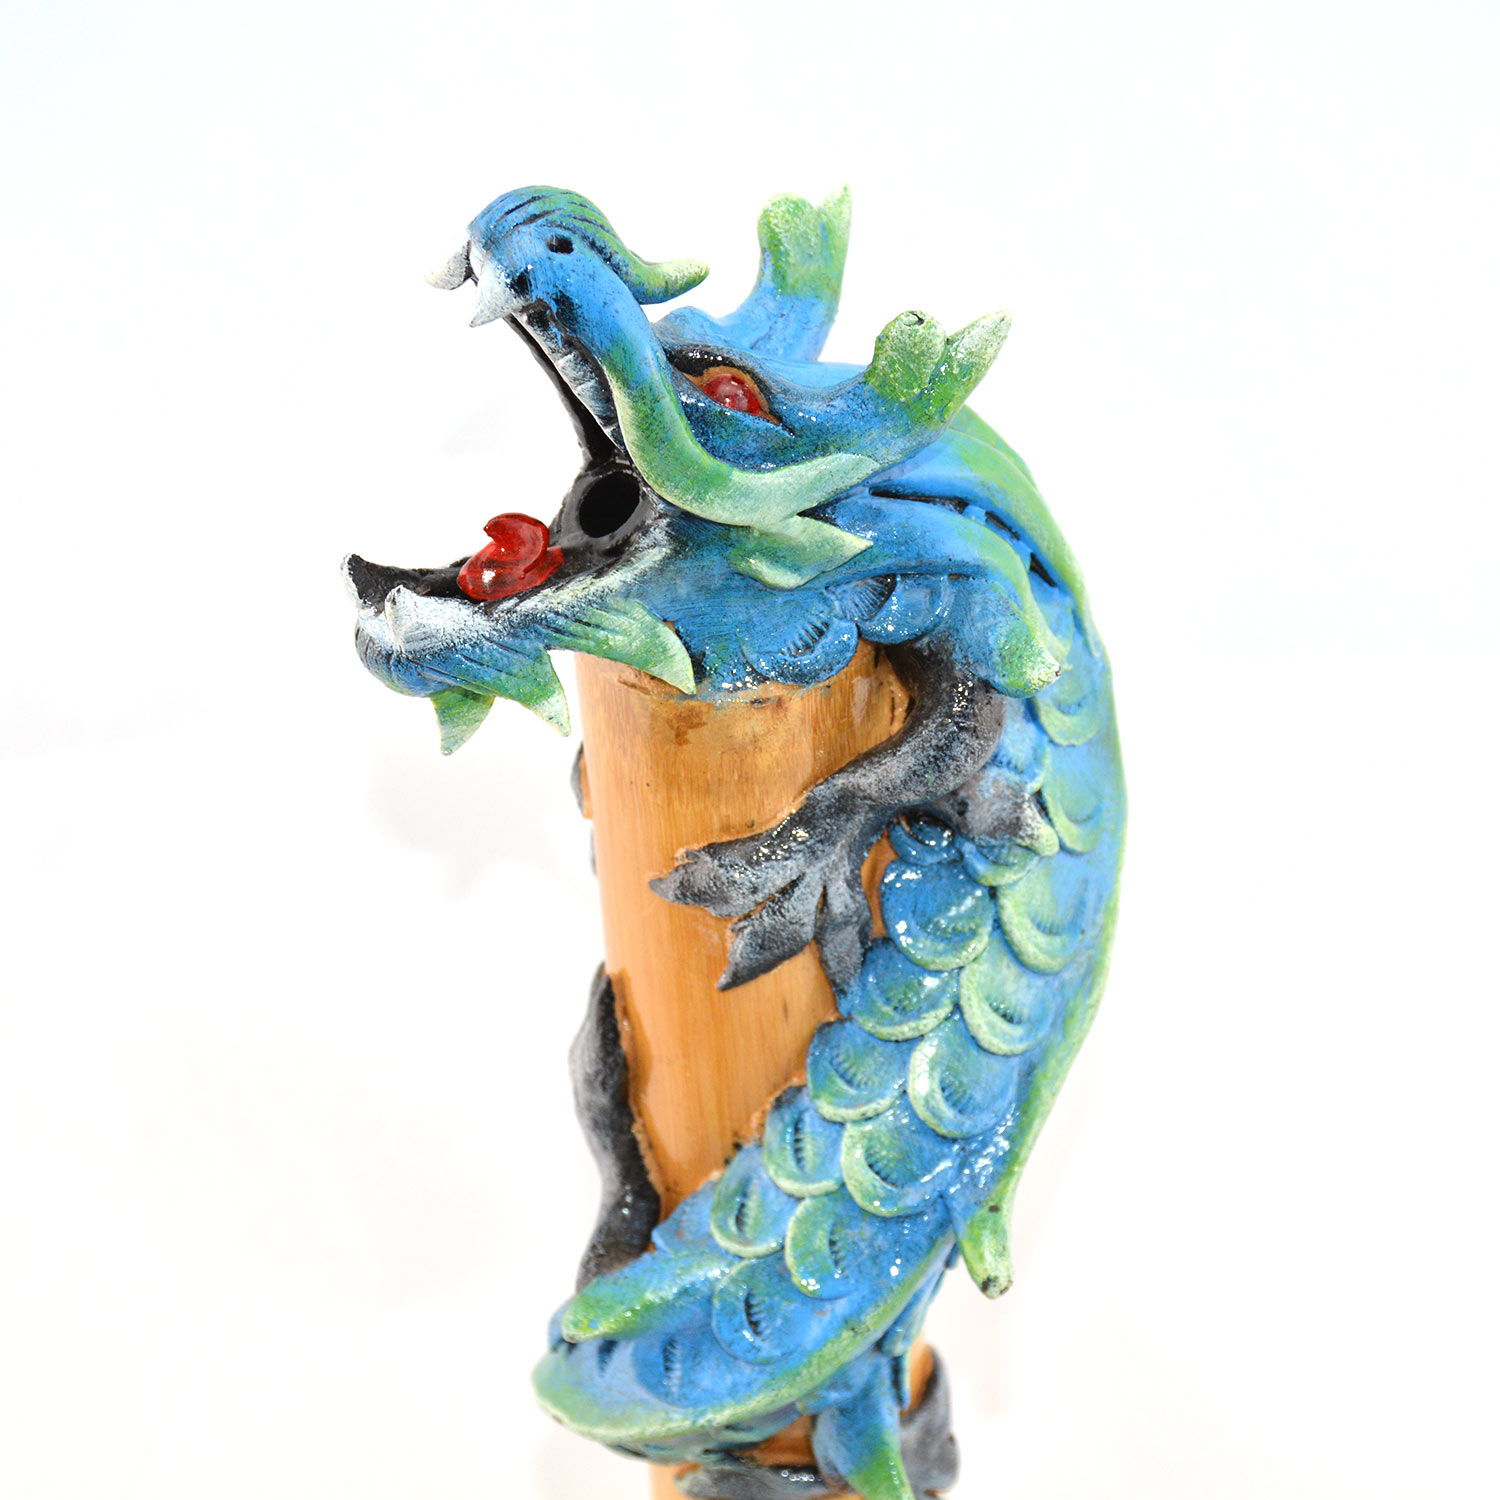 Dragon Sculpture Paint Your Own Dragon Art Incense Holder Bamboo Statue with Free 25gm Incense Sticks